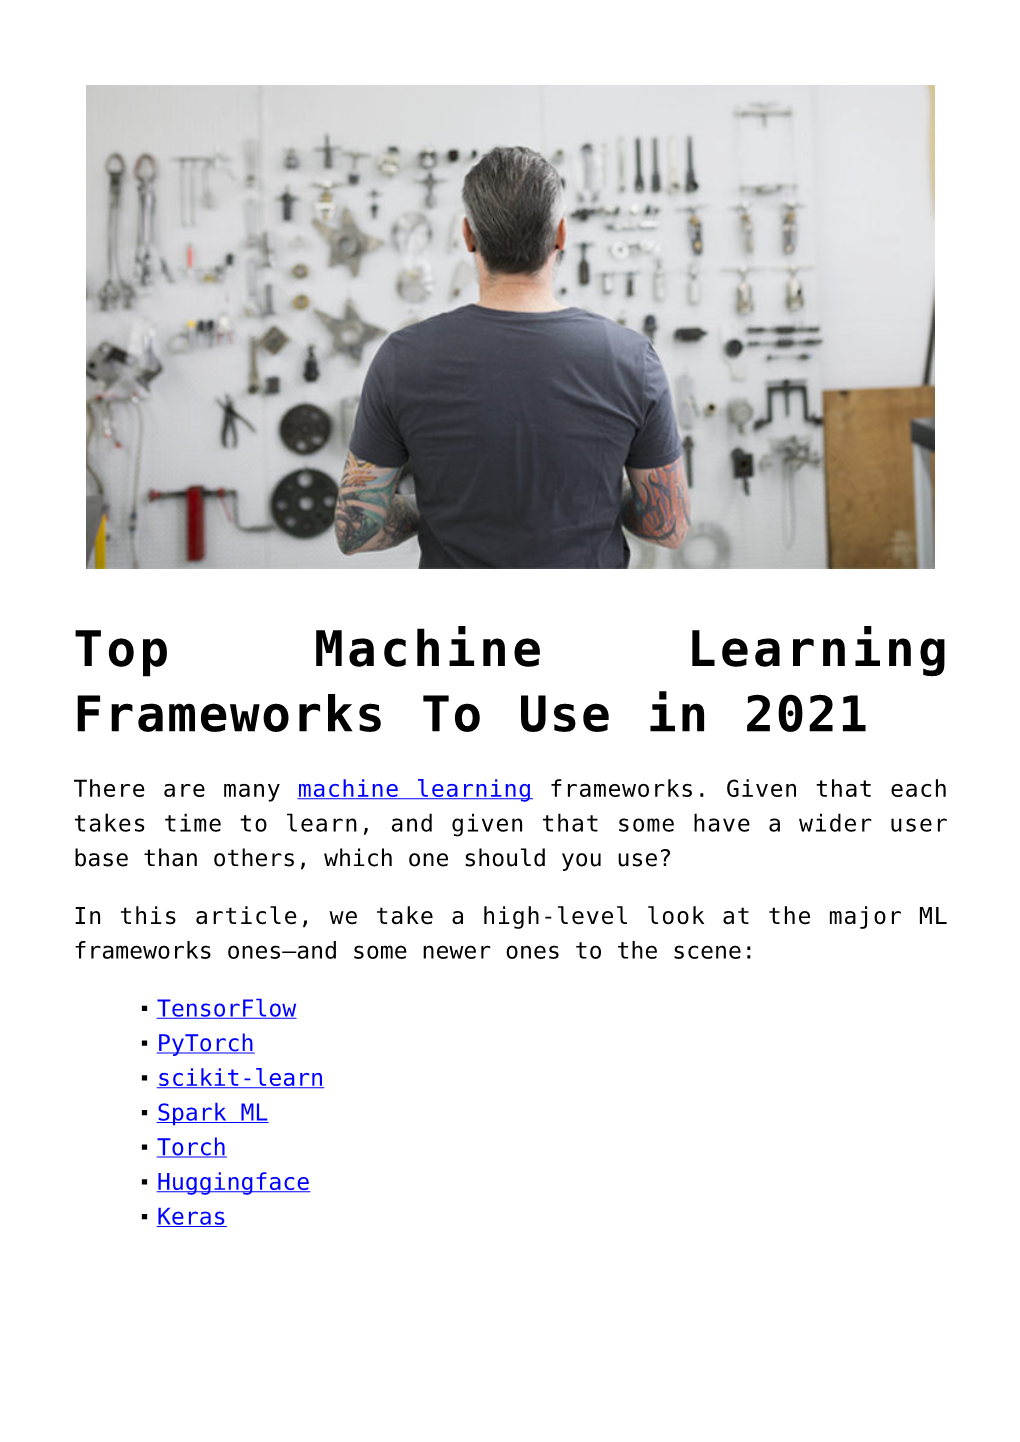 Top Machine Learning Frameworks to Use in 2021